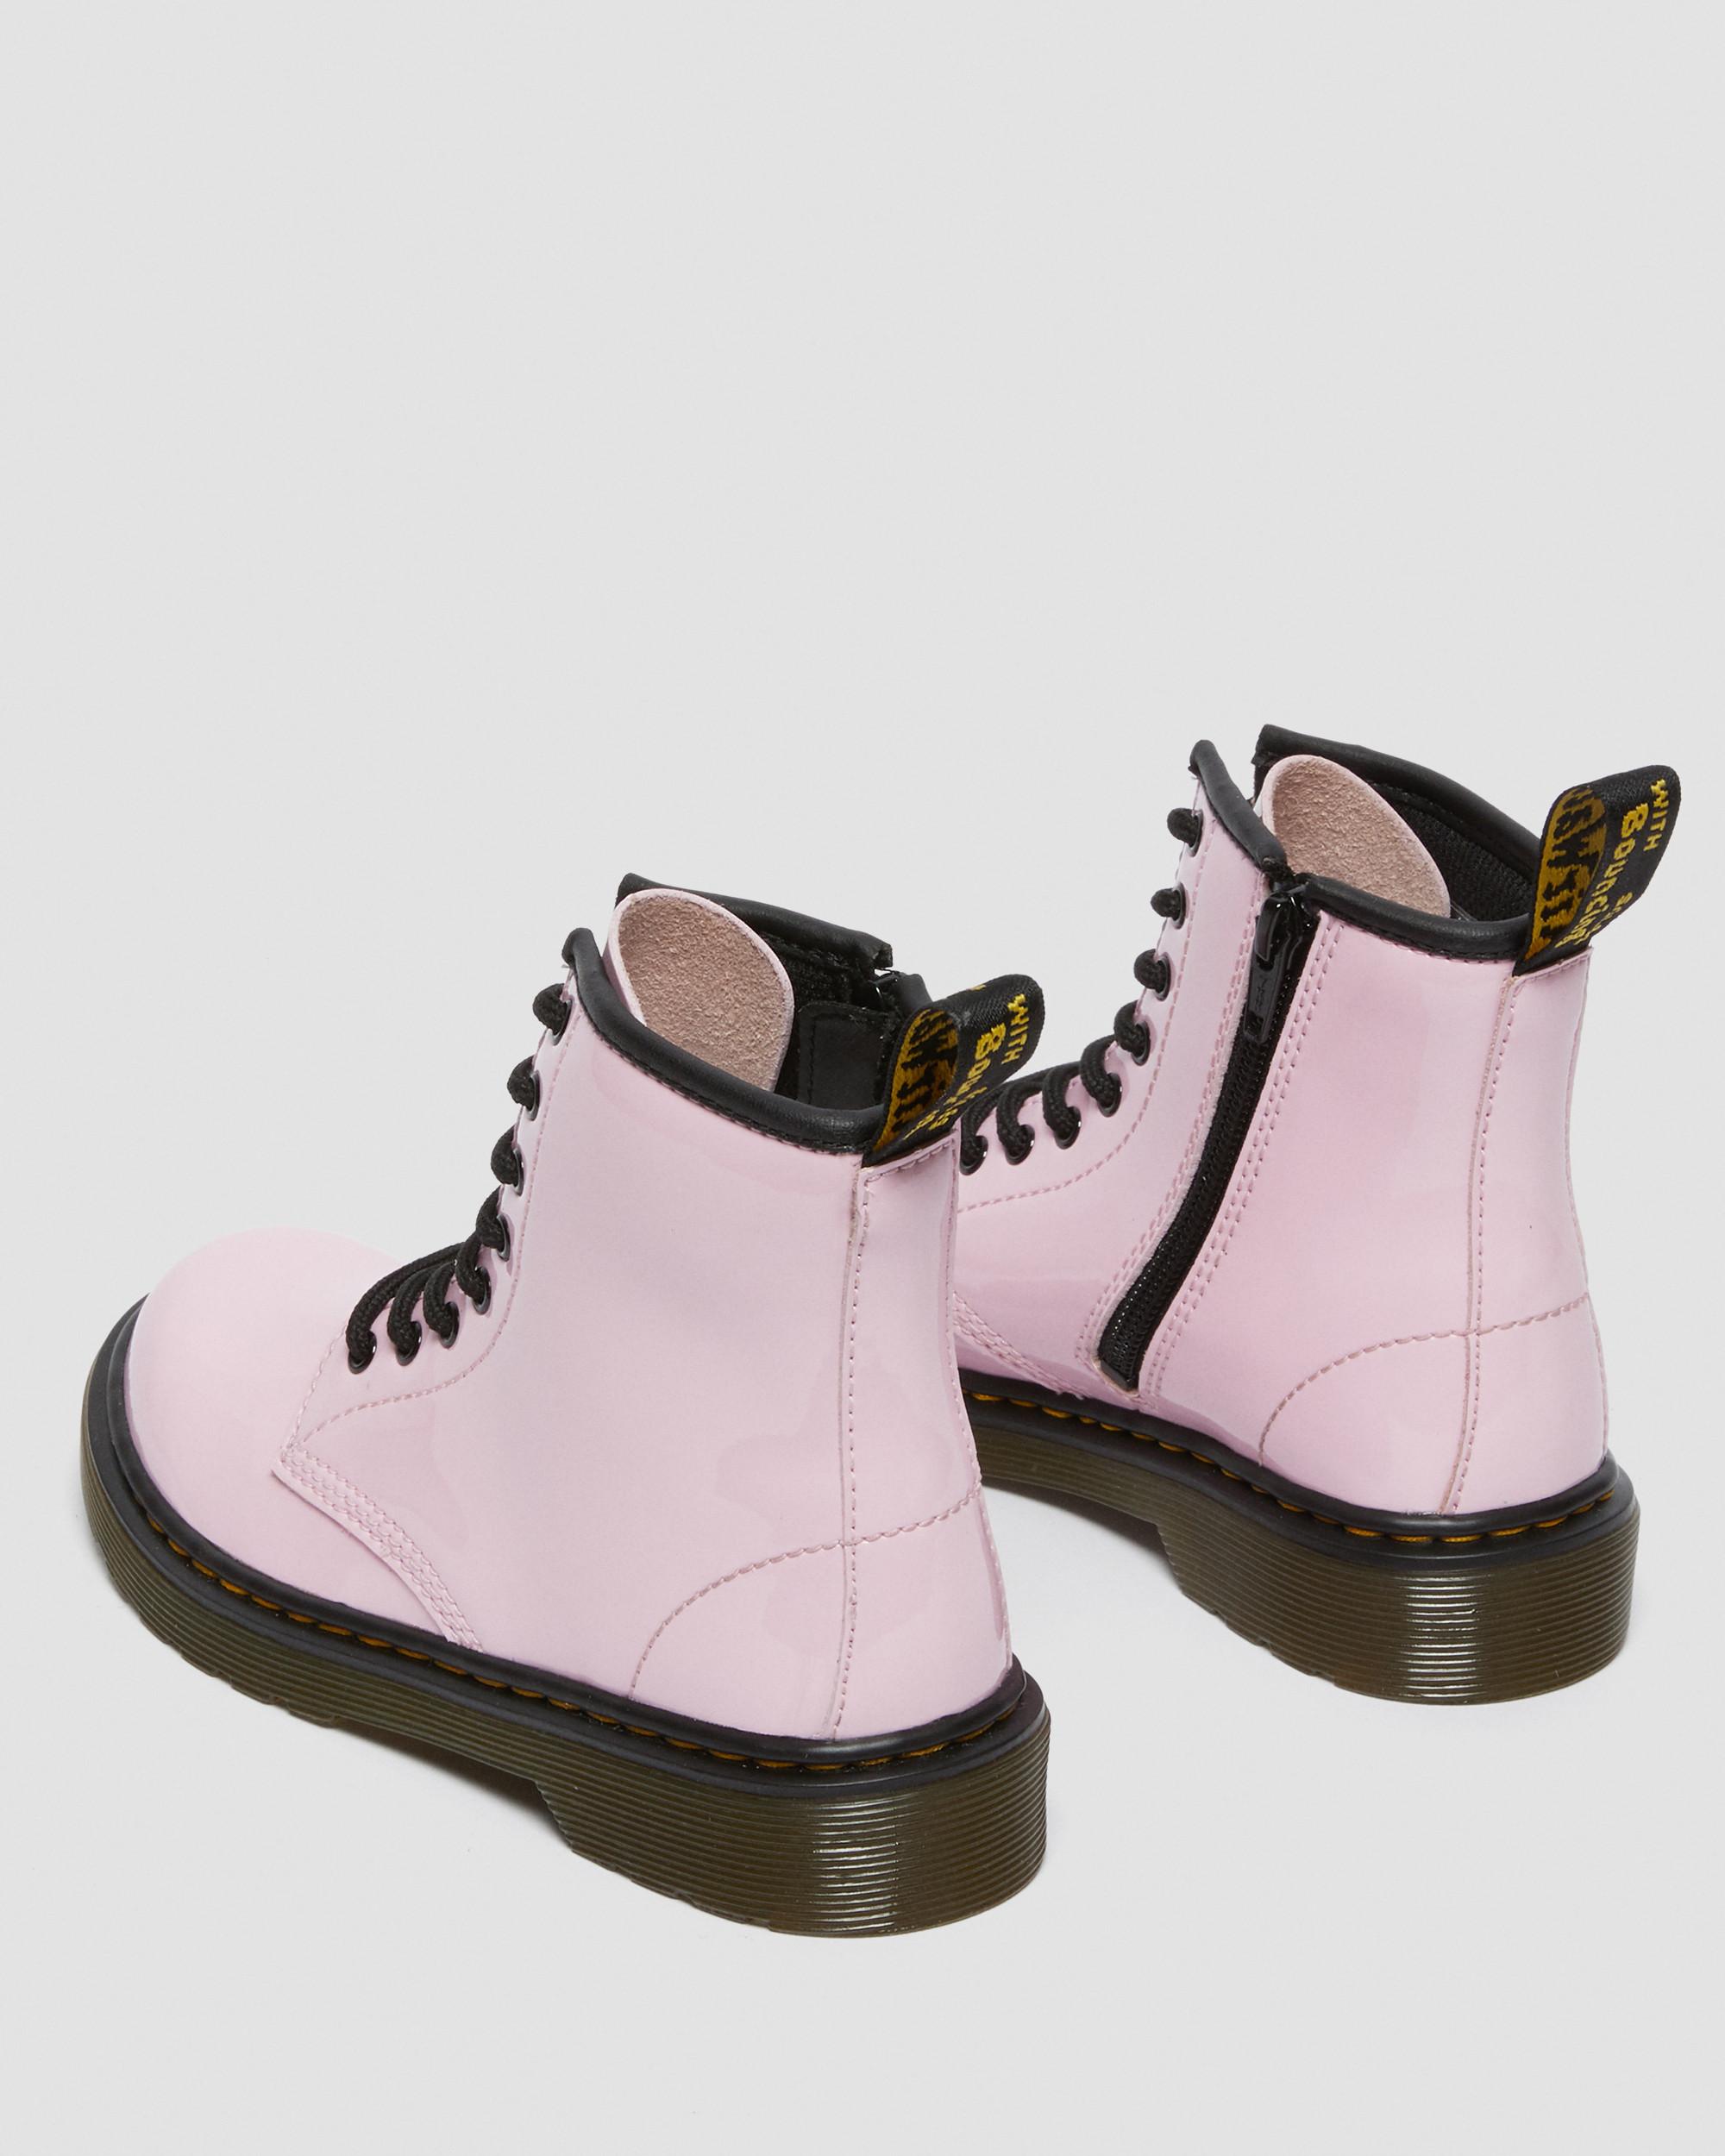 Junior 1460 Patent Leather Lace Up Boots in Pale Pink